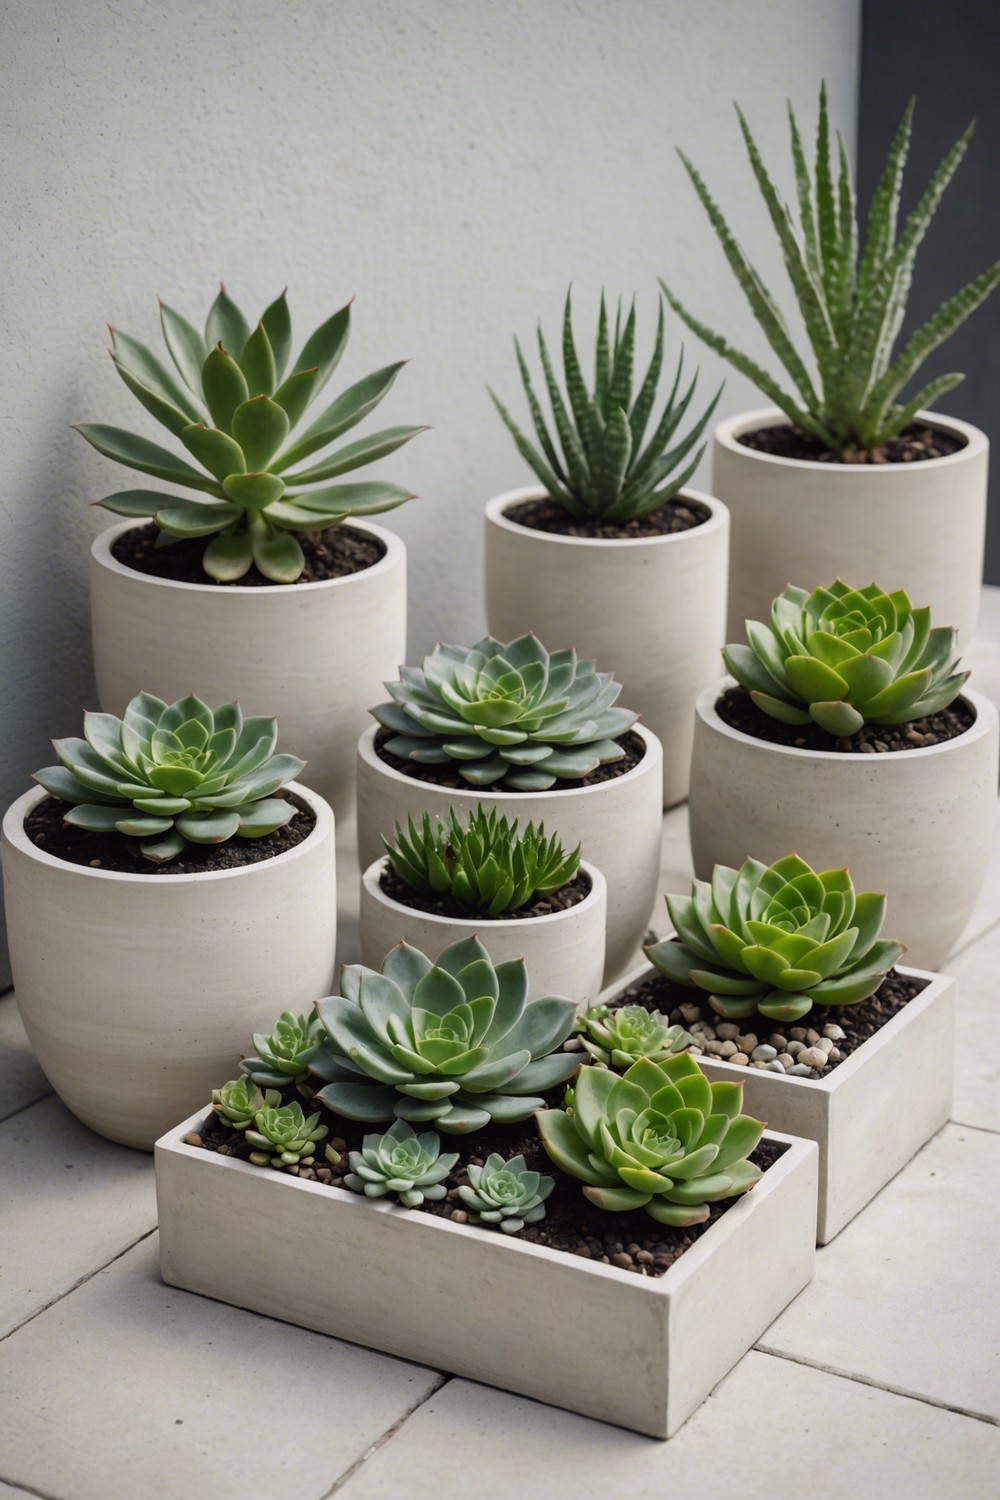 Minimalist Succulent Designs for a Simple, Chic Look